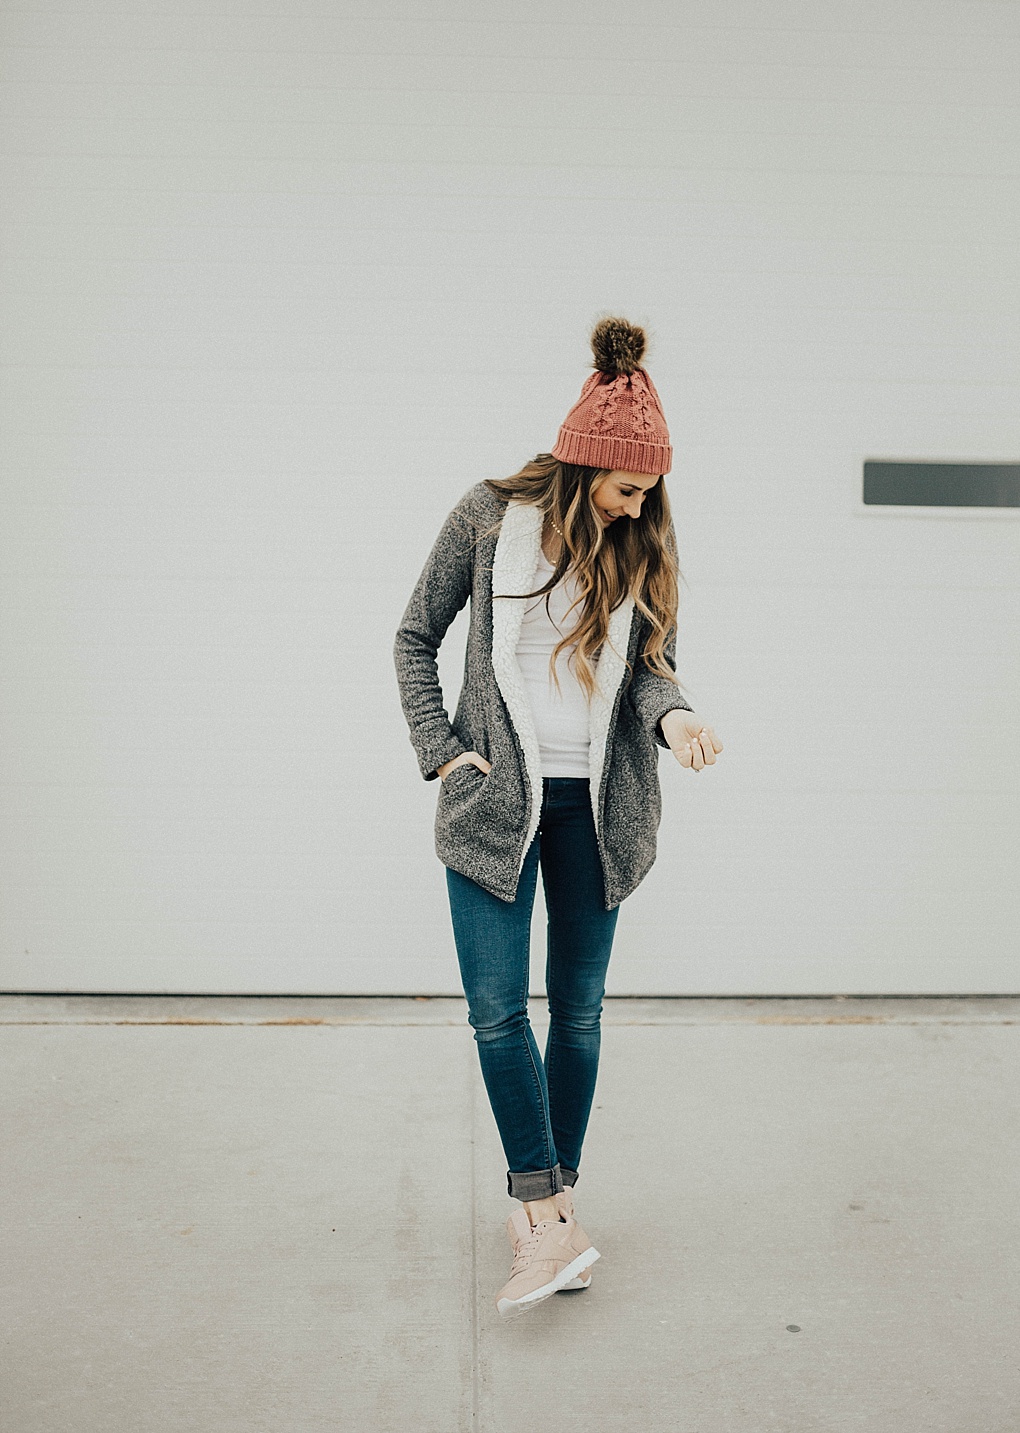 Functional and Cozy Clothing For Winter by Utah style blogger Dani Marie